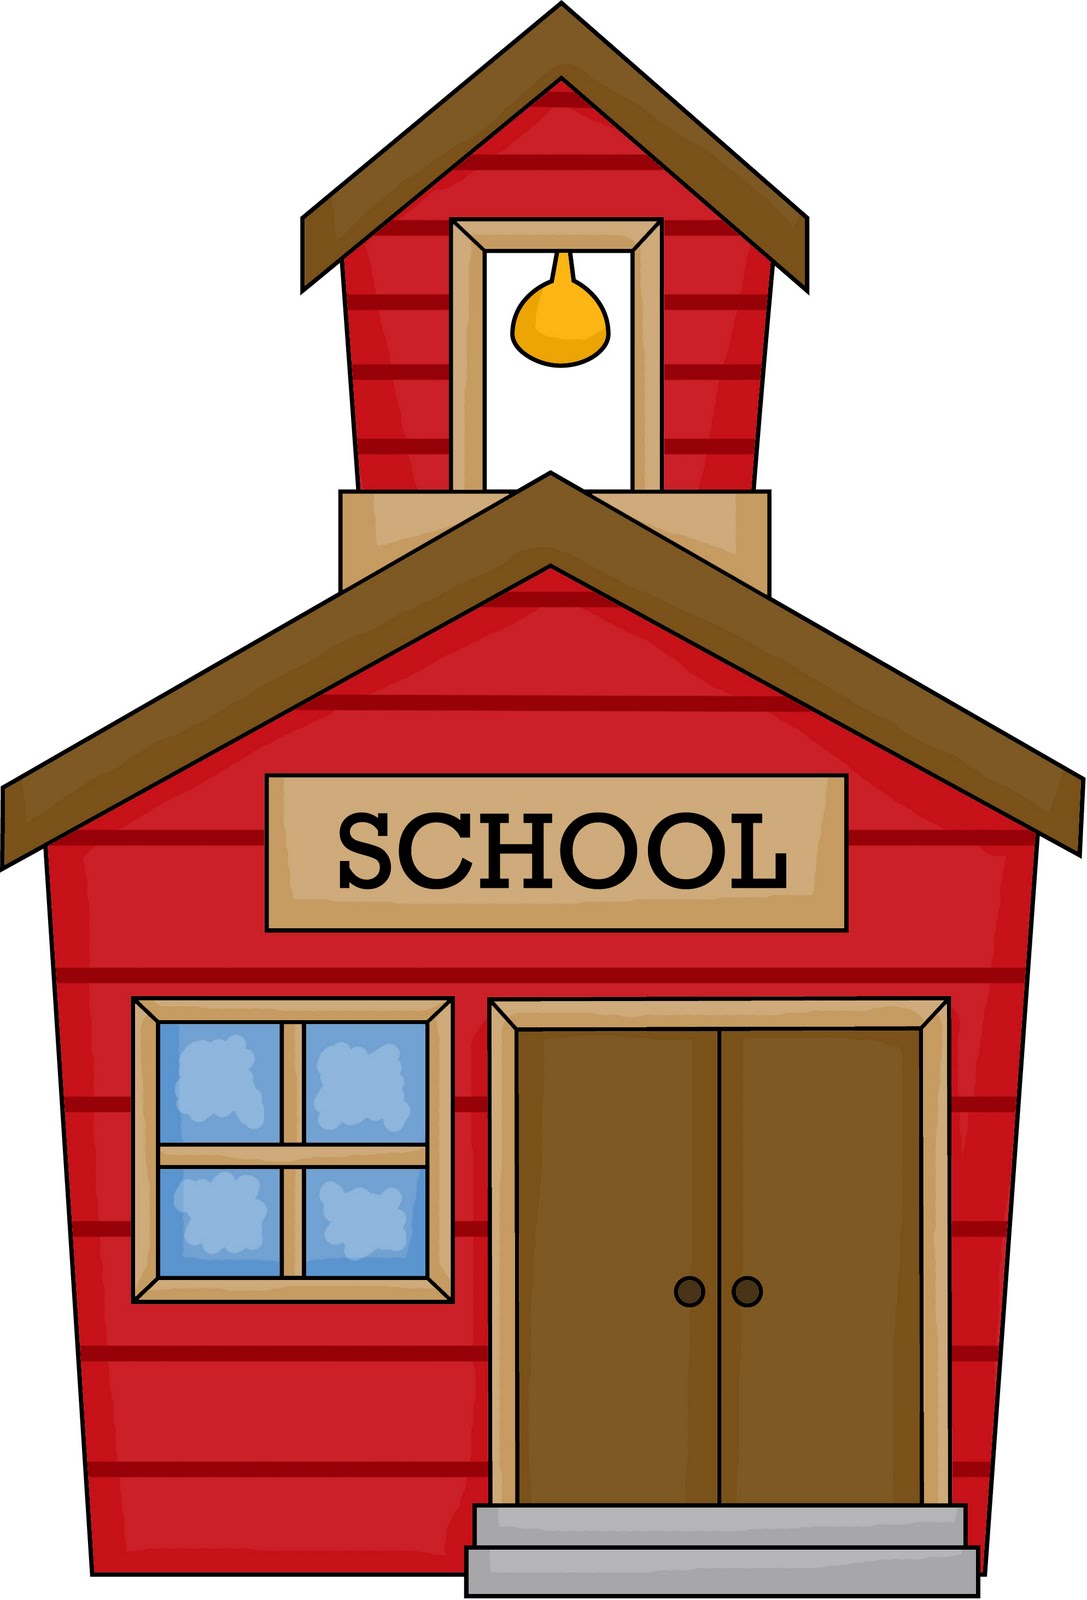 School Images Hd Image Clipart